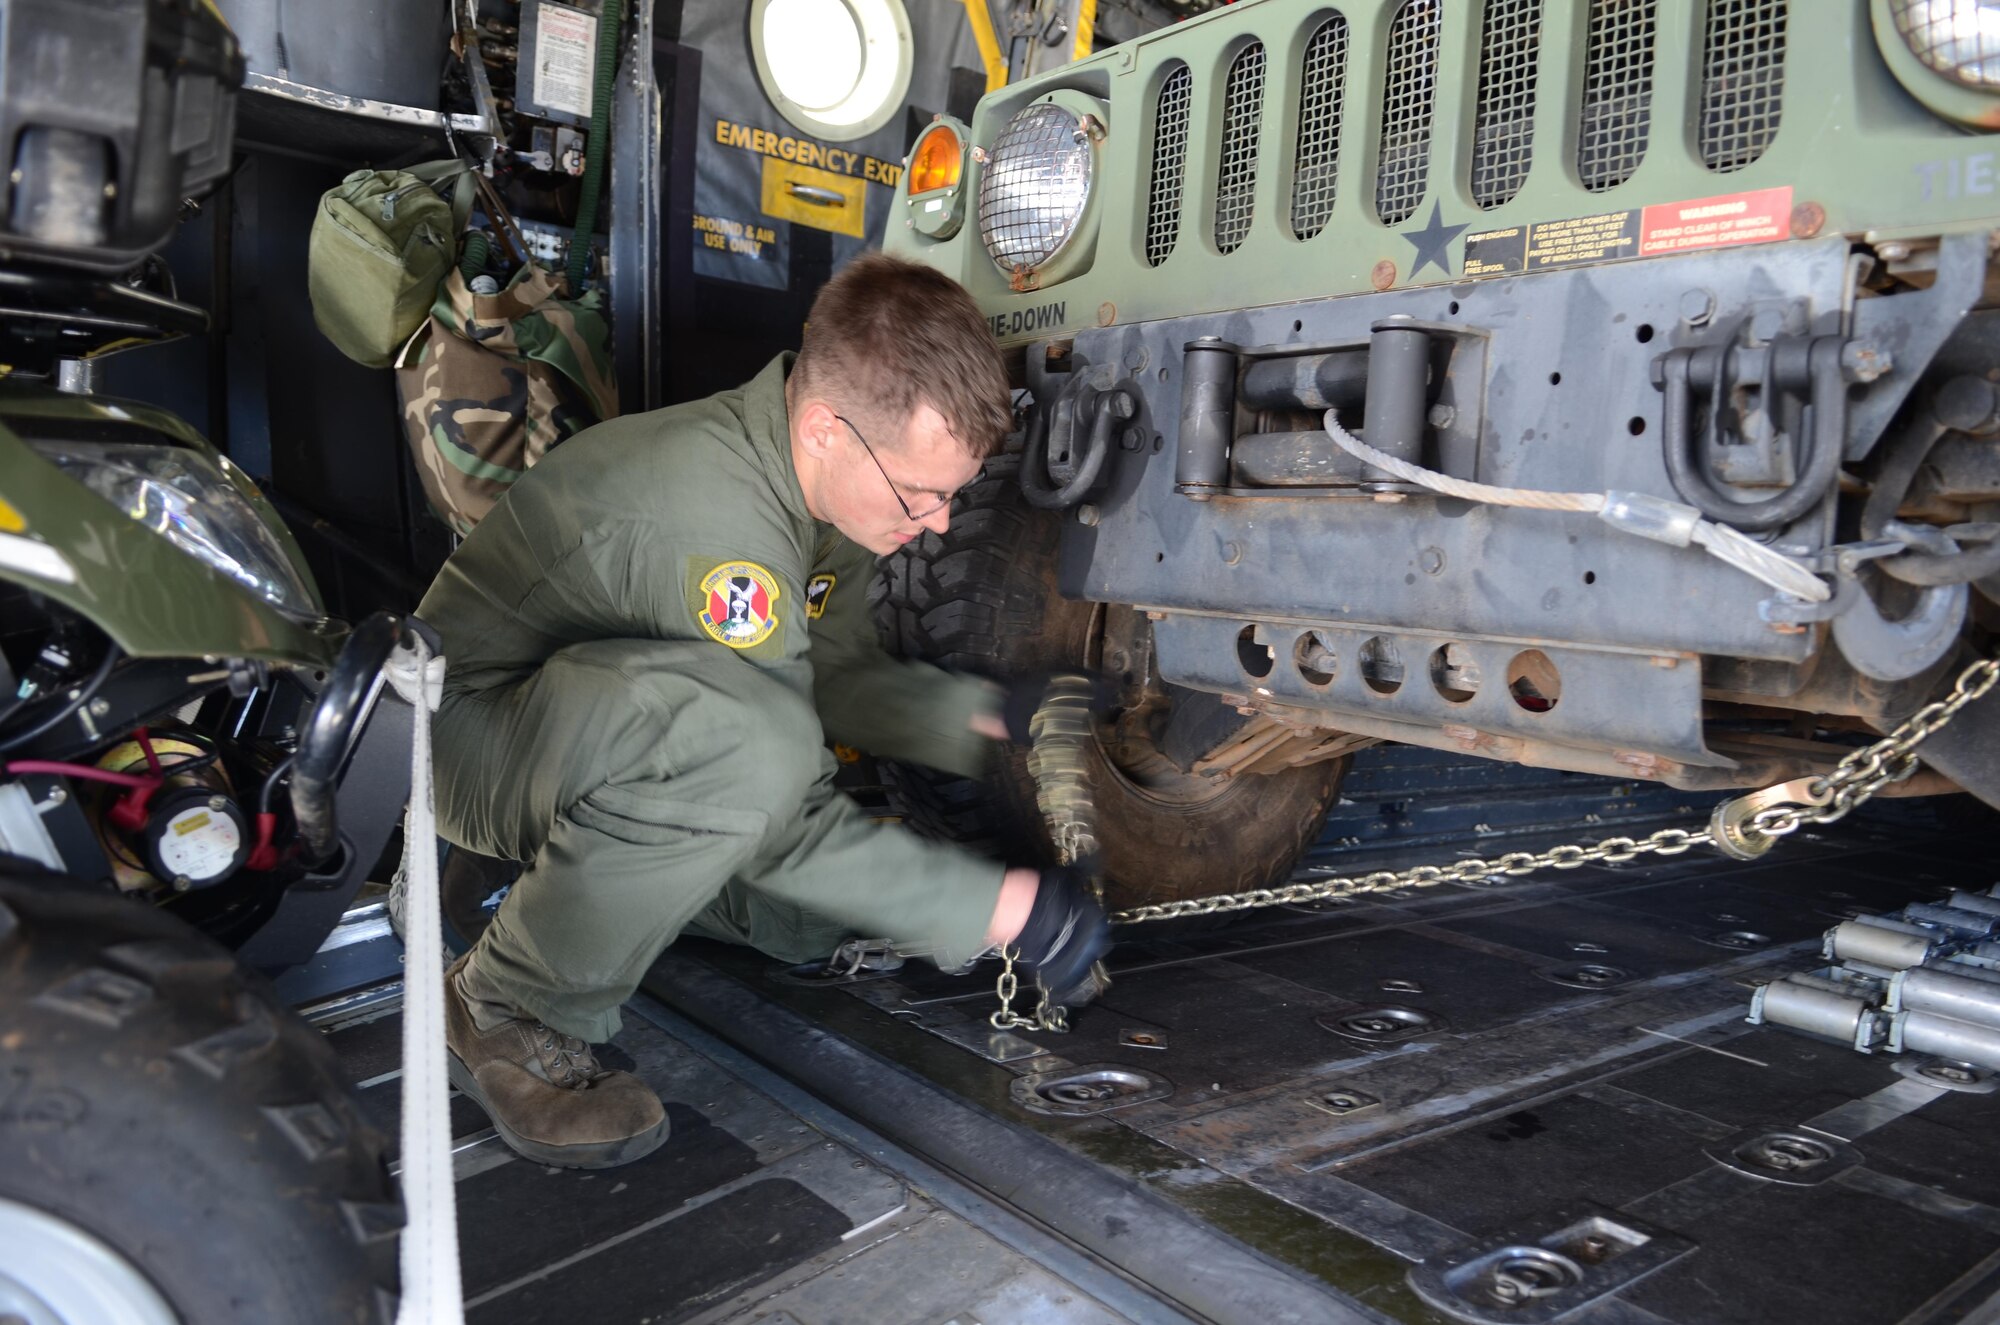 Senior Airman Timothy Oberman secures a Humvee inside an aircraft, Nov. 14, 2013, at Andersen Air Force Base, Guam, before departing in support Operation Damayan in Tacloban, Philippines. The U.S. military’s ability to respond rapidly to the Philippine government’s request reaffirms the value of the close cooperation our two nations share. The Filipino people are responding to this setback with characteristic resilience, aided by the effective measures their government took to help prepare them for the storm. Oberman is a 36th Airlift Squadron C-130 Hercules loadmaster. 